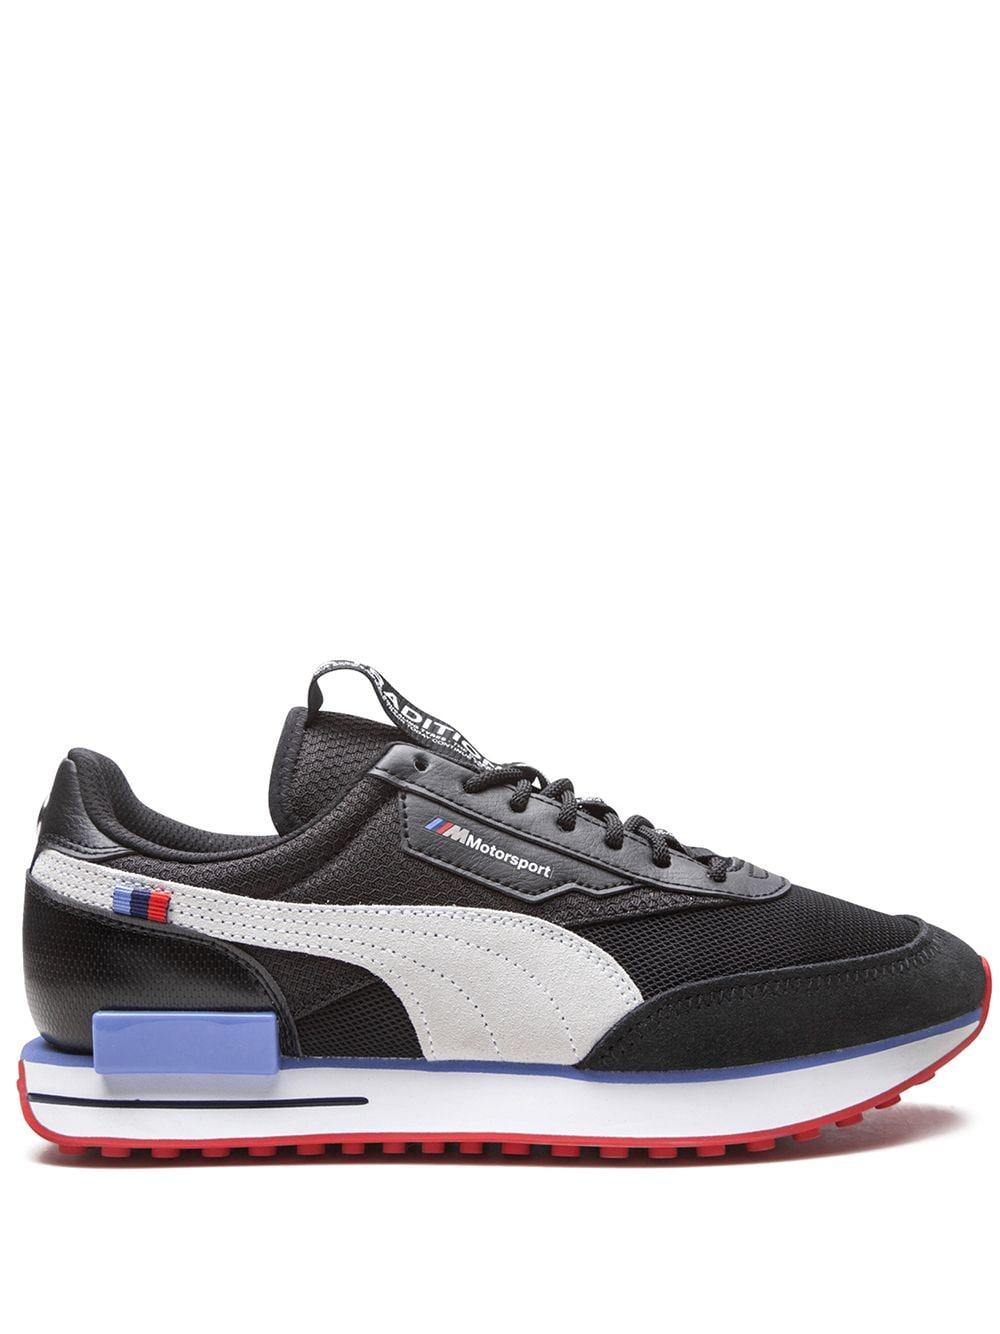 PUMA Leather Bmw Mms Future Rider Sneakers in Black for Men | Lyst